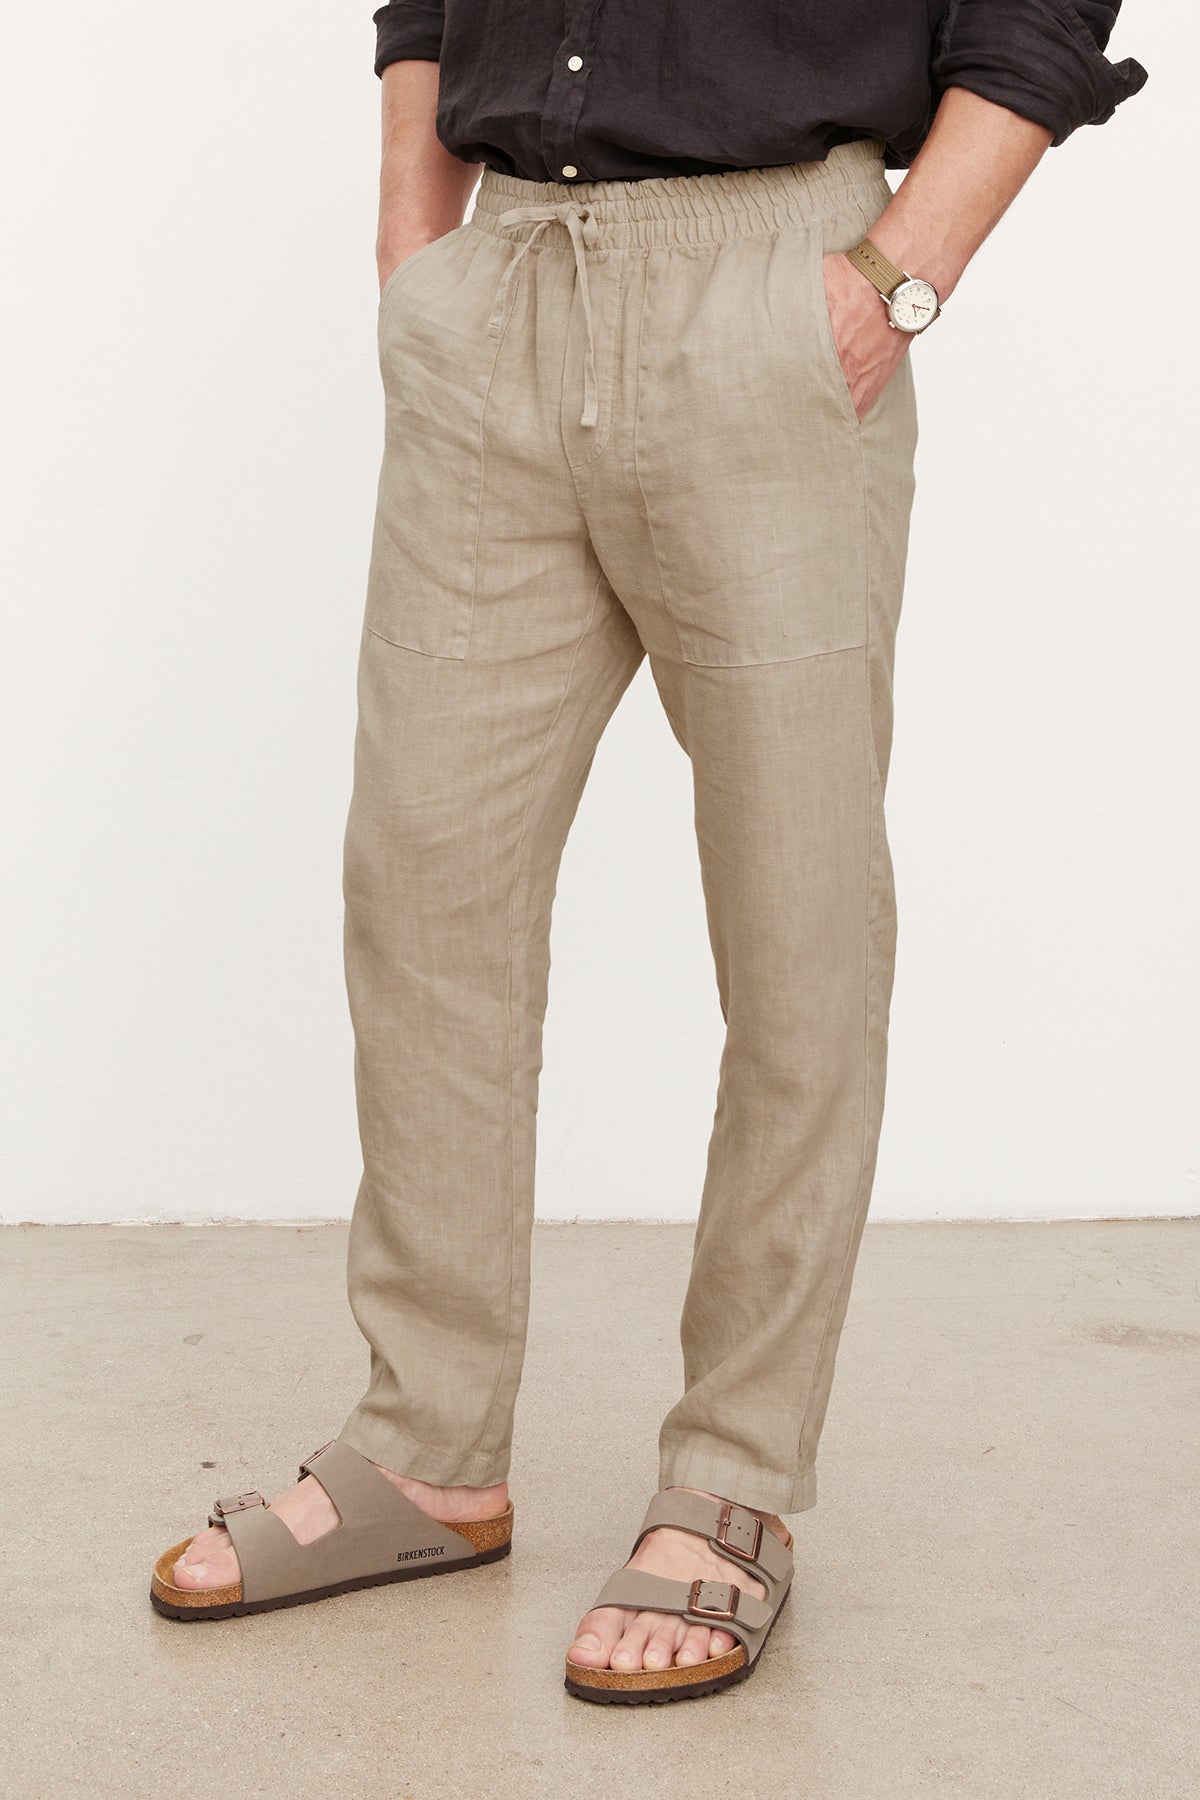   Man standing in a casual pose wearing Velvet by Graham & Spencer's Phelan Linen Pants, a black shirt, a watch, and beige sandals. Only the lower half of his body is visible. 